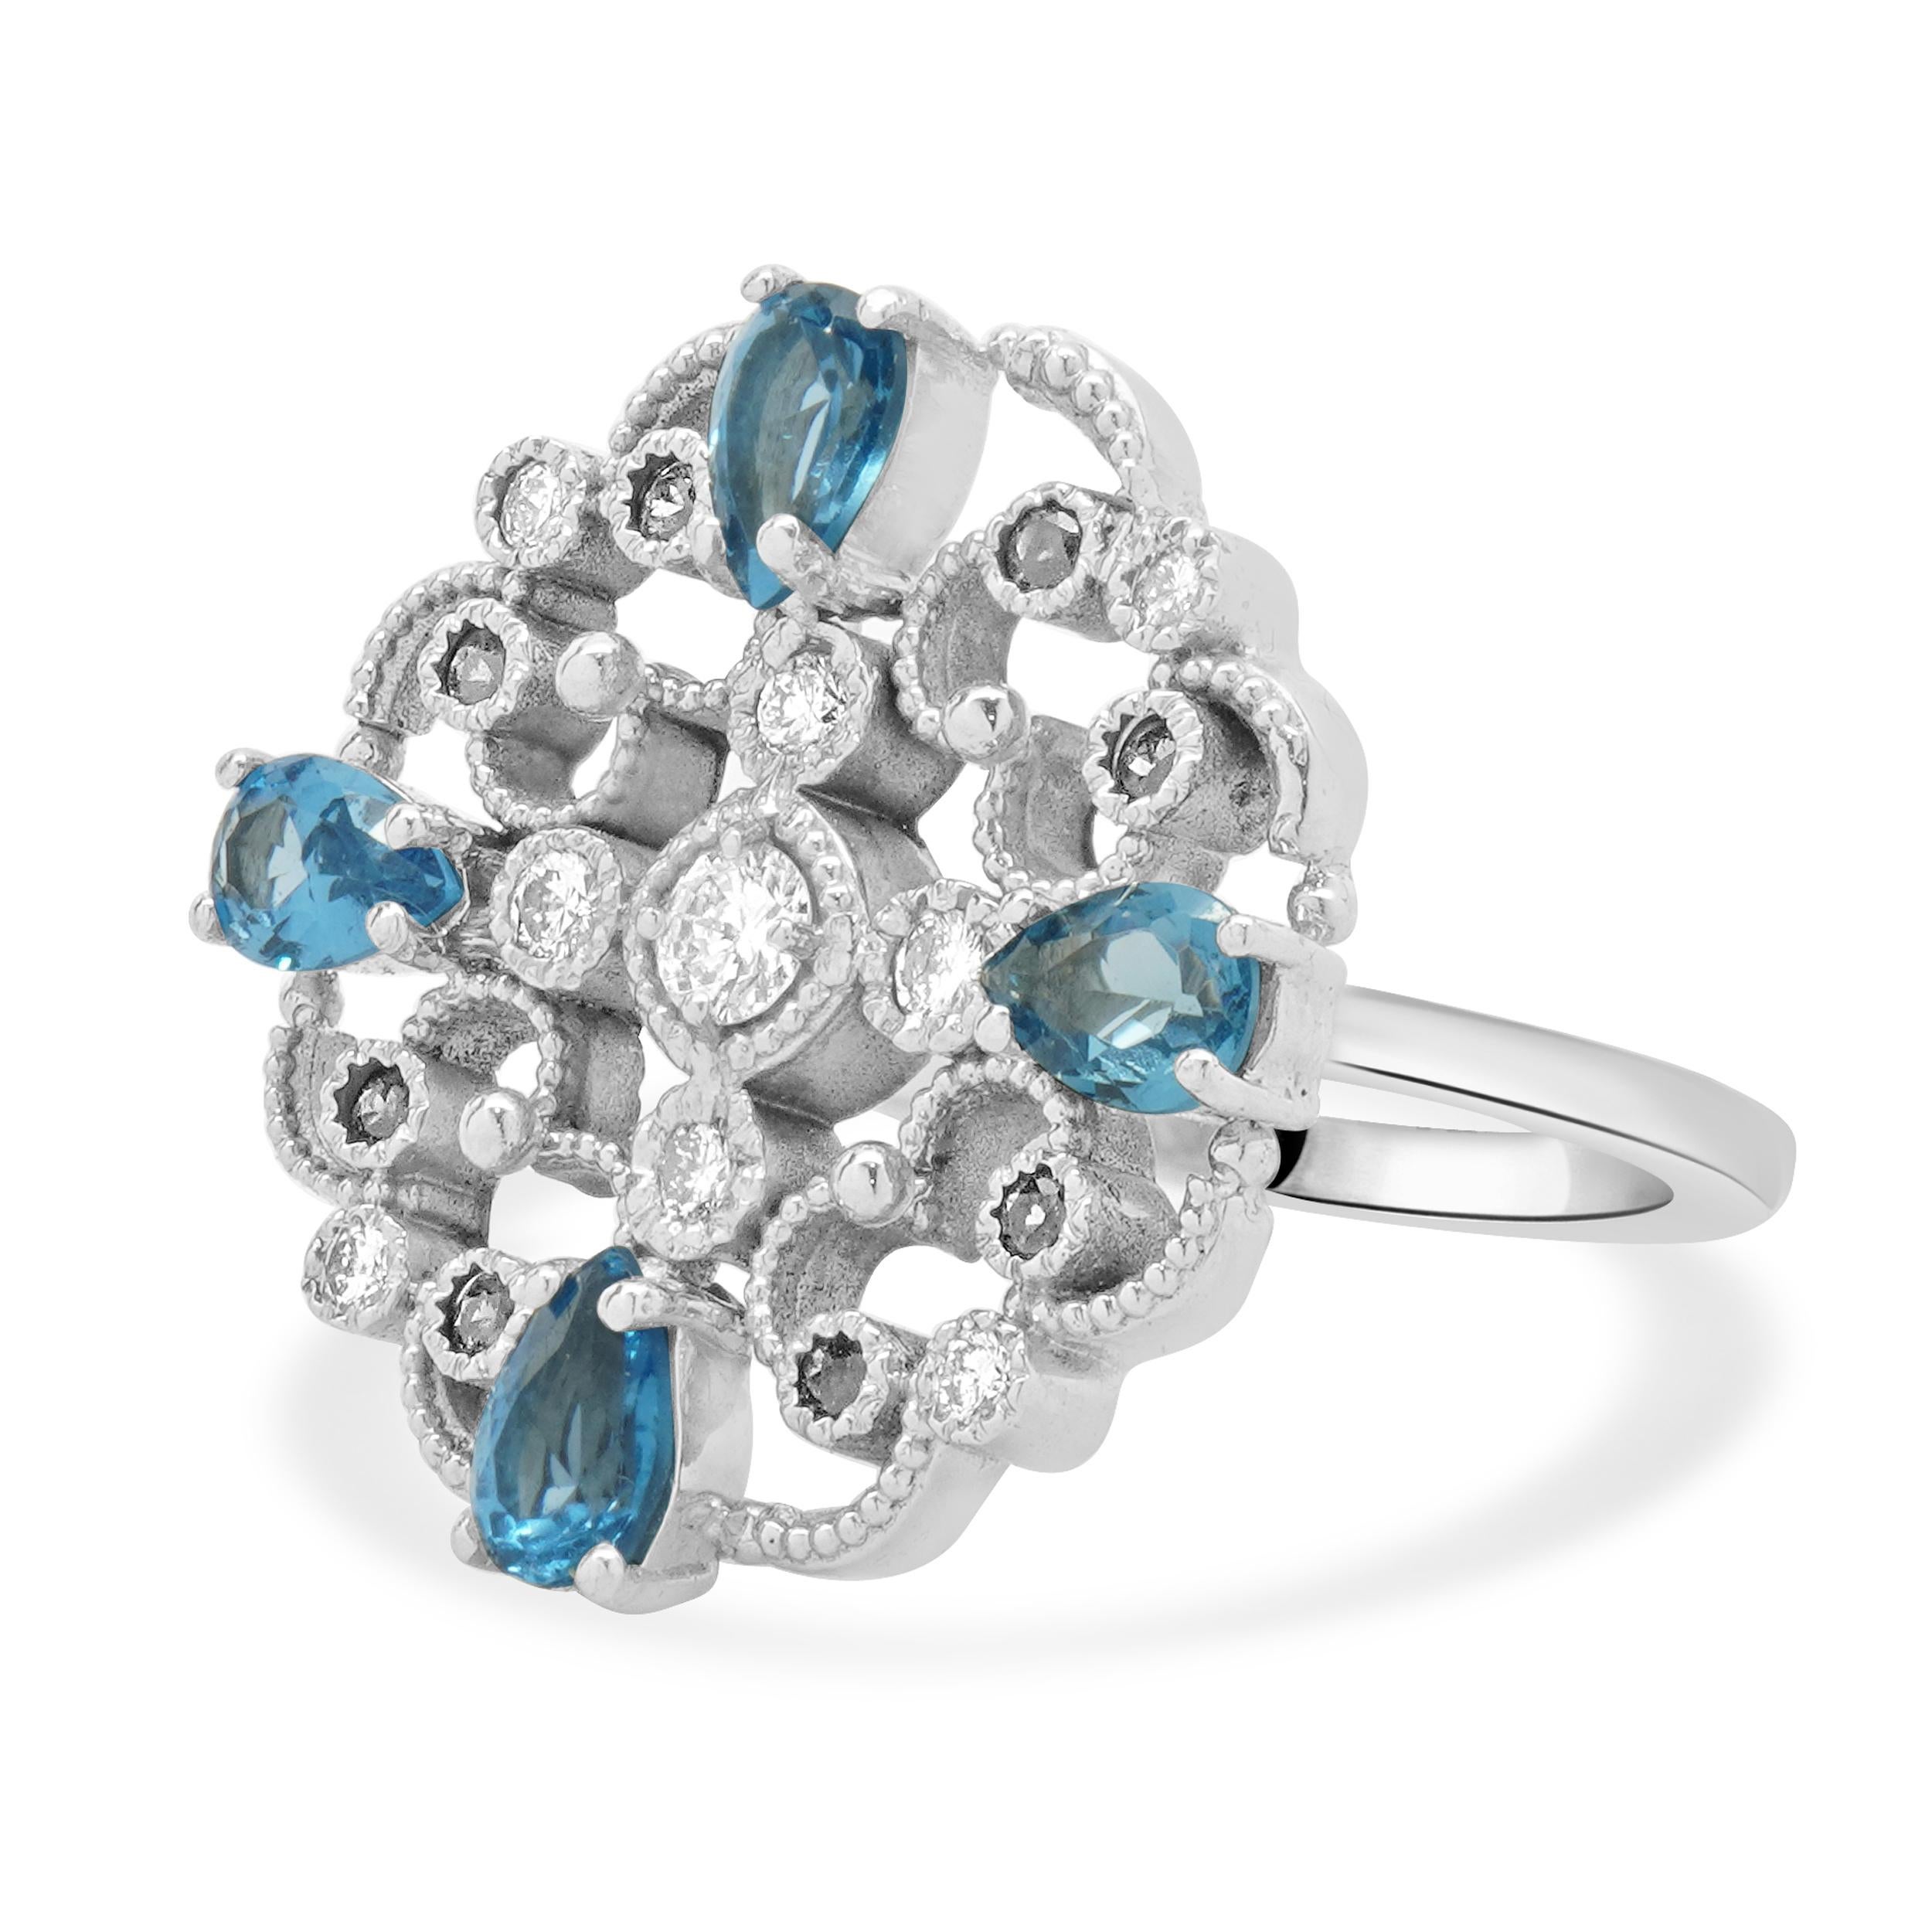 Designer: custom
Material: 14K white gold
Diamond: 9 round brilliant cut = 0.30cttw
Color: G
Clarity: SI1
Blue Topaz: 4 pear cut = 1.80cttw
Sapphires: 8 round cut= 0.16cttw
Dimension: ring top measures 24mm wide
Ring Size: 8.25 (please allow two